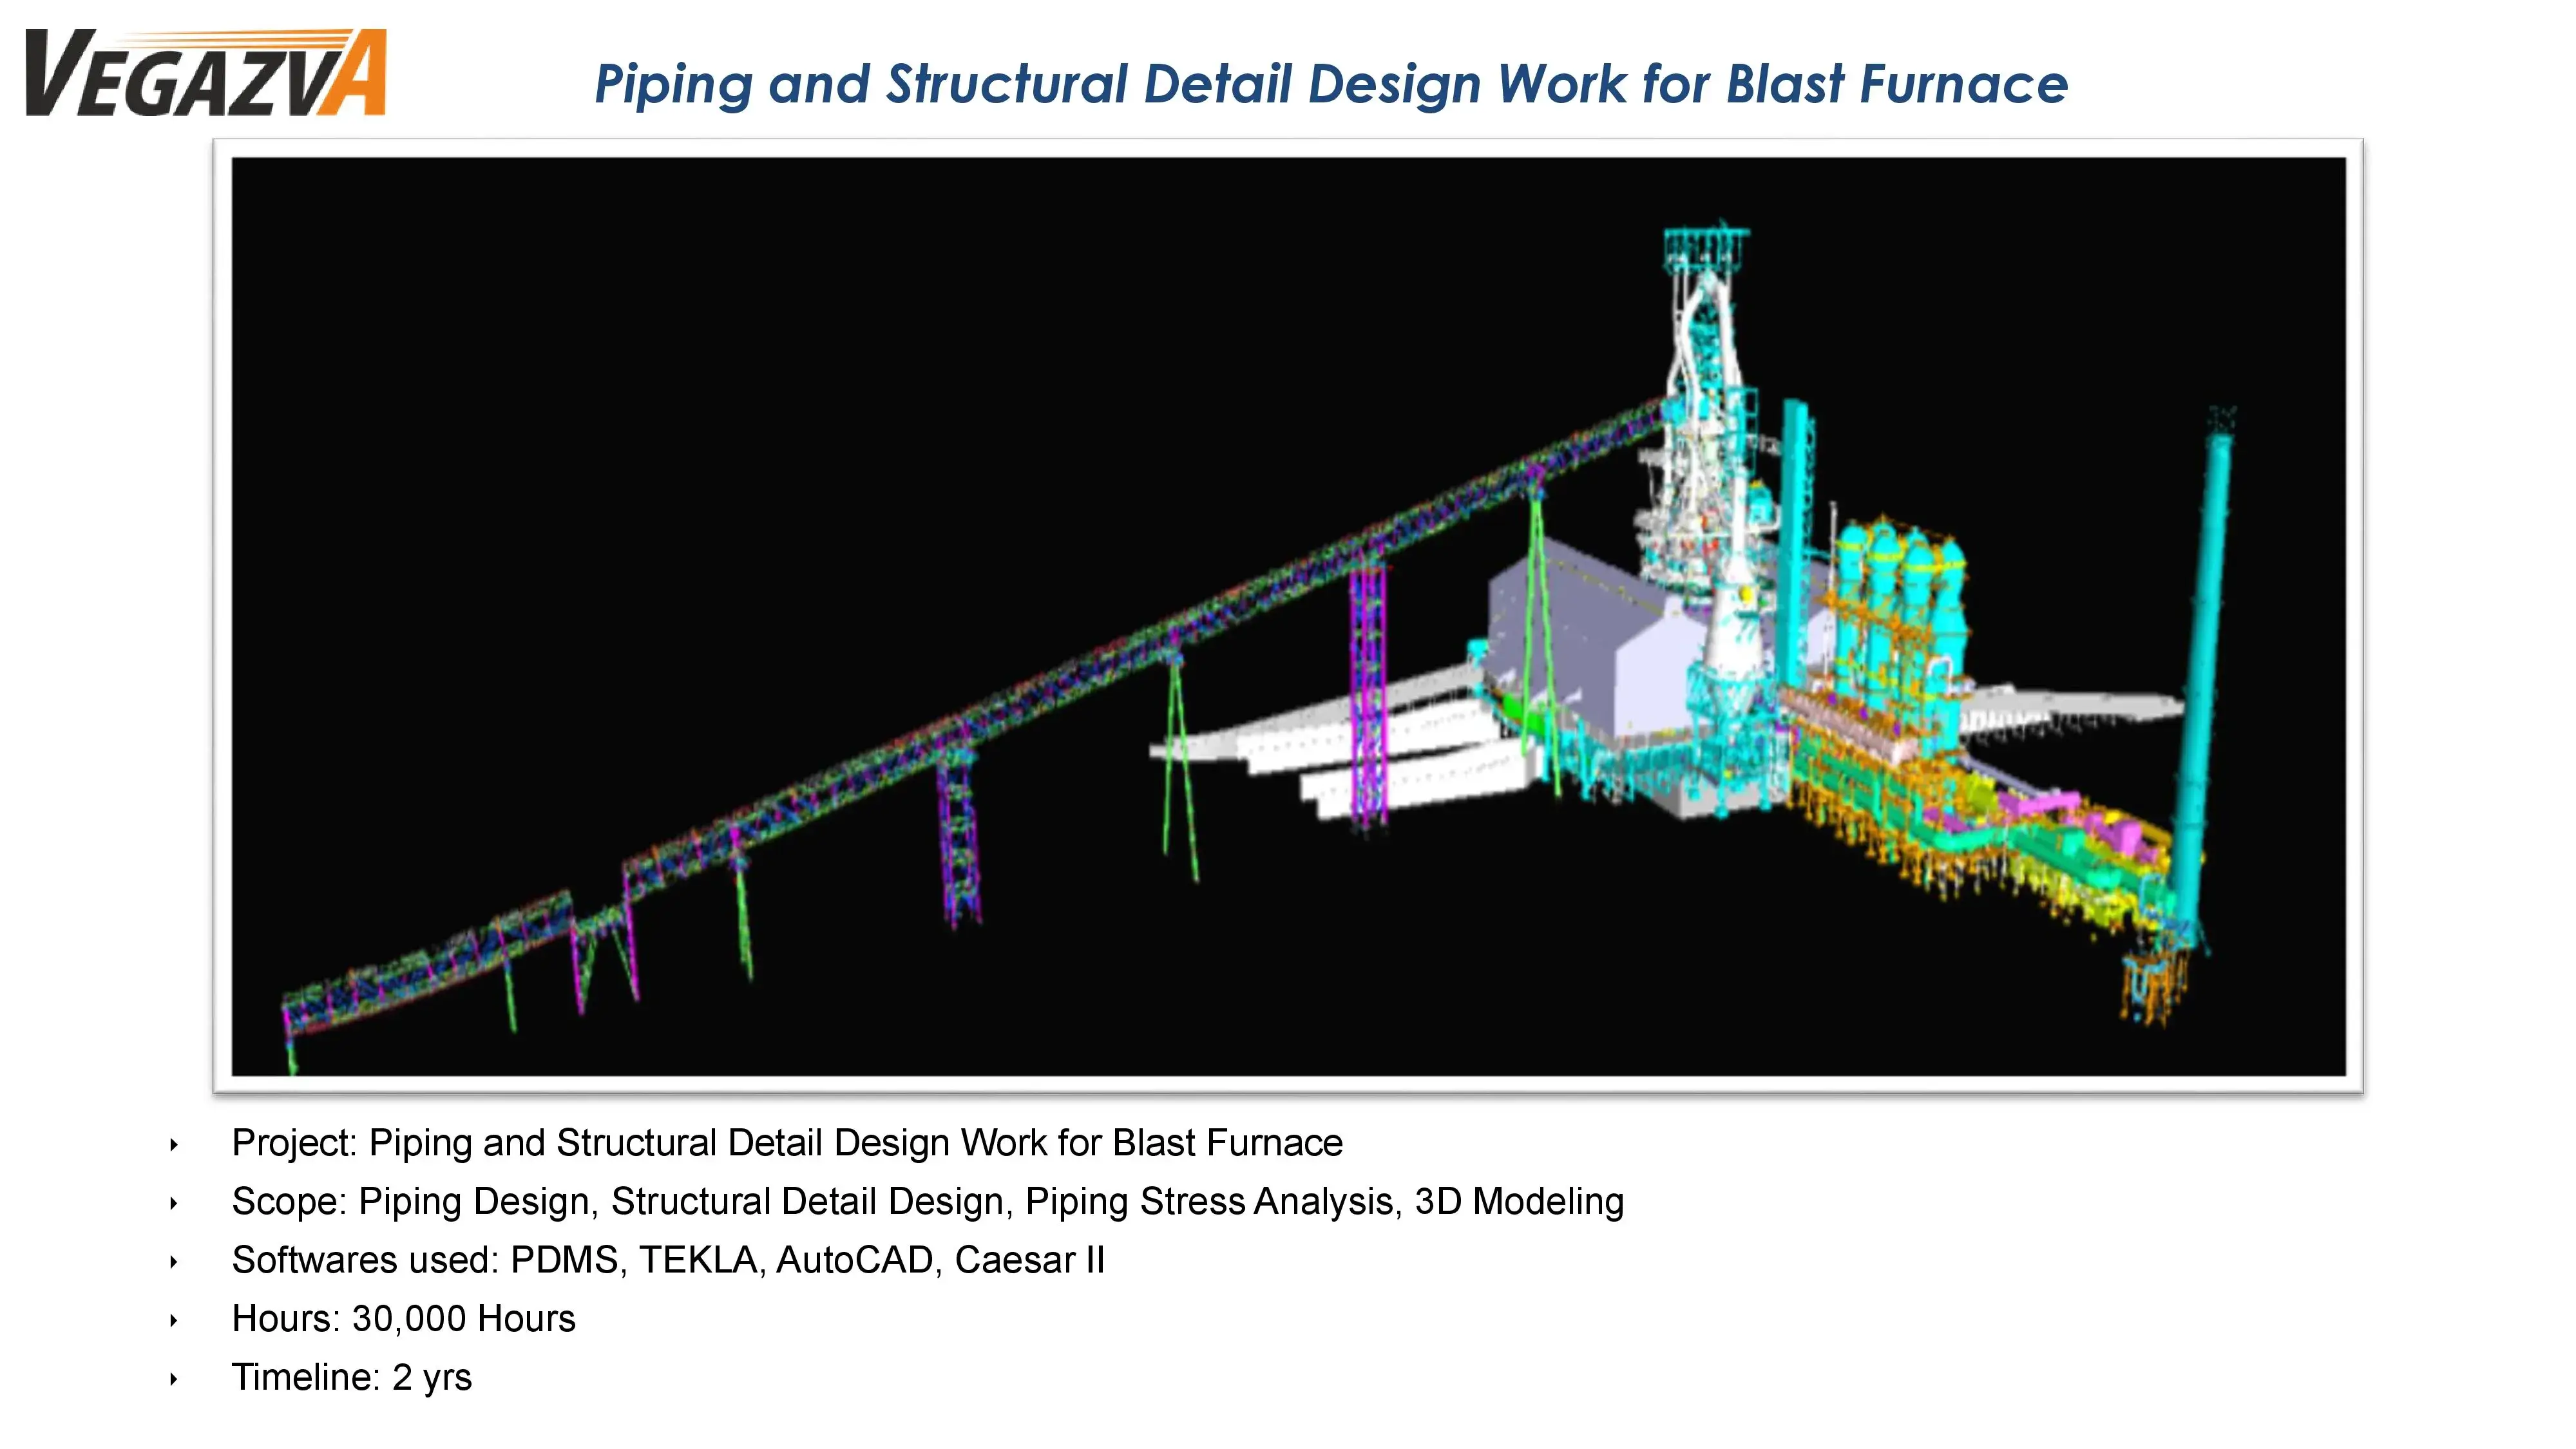 Piping and Structural Detail Design Work for Blast Furnace